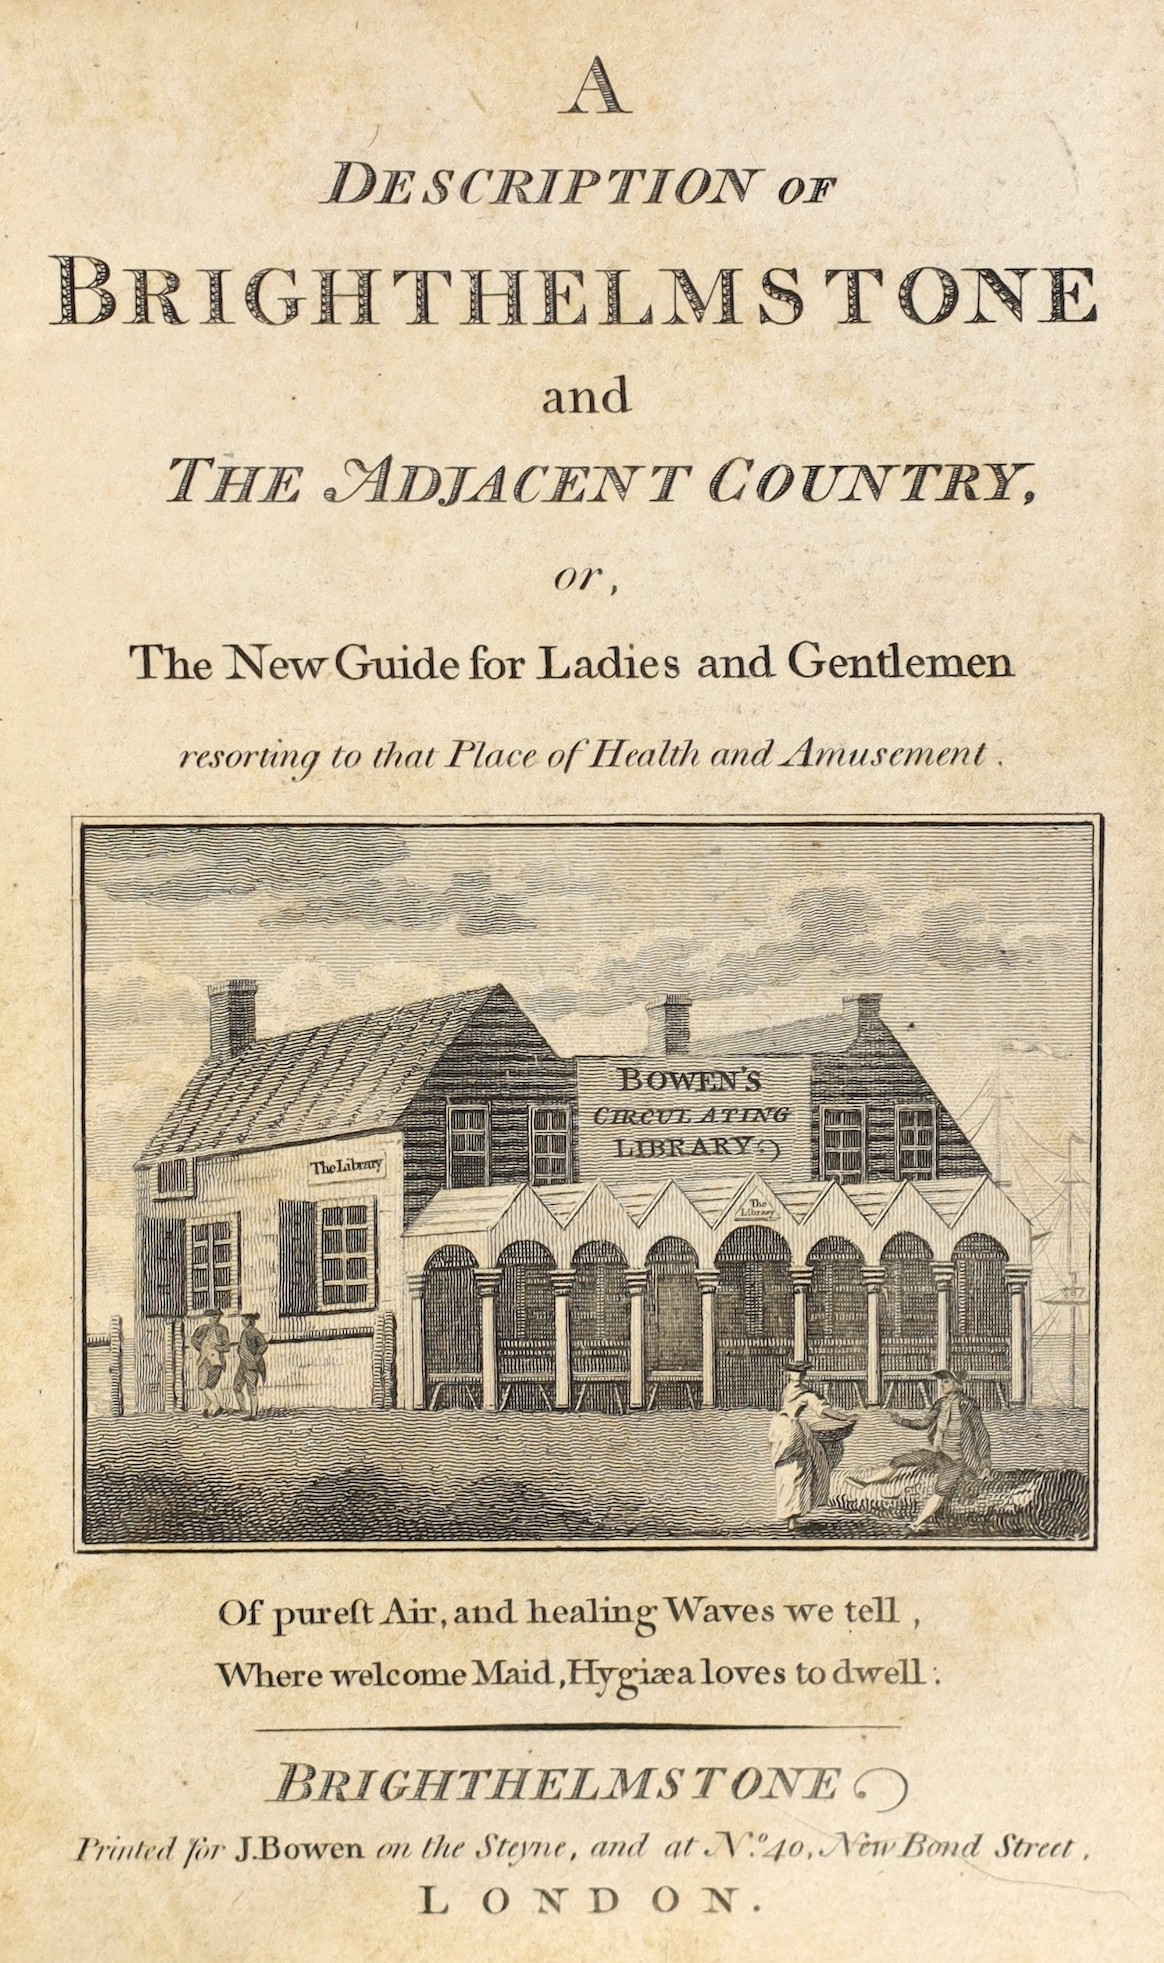 BRIGHTON: A Description of Brighthelmstone and the Adjacent Country, or, the New Guide for ladies and gentlemen resorting to that place for health and amusement. pictorial engraved title